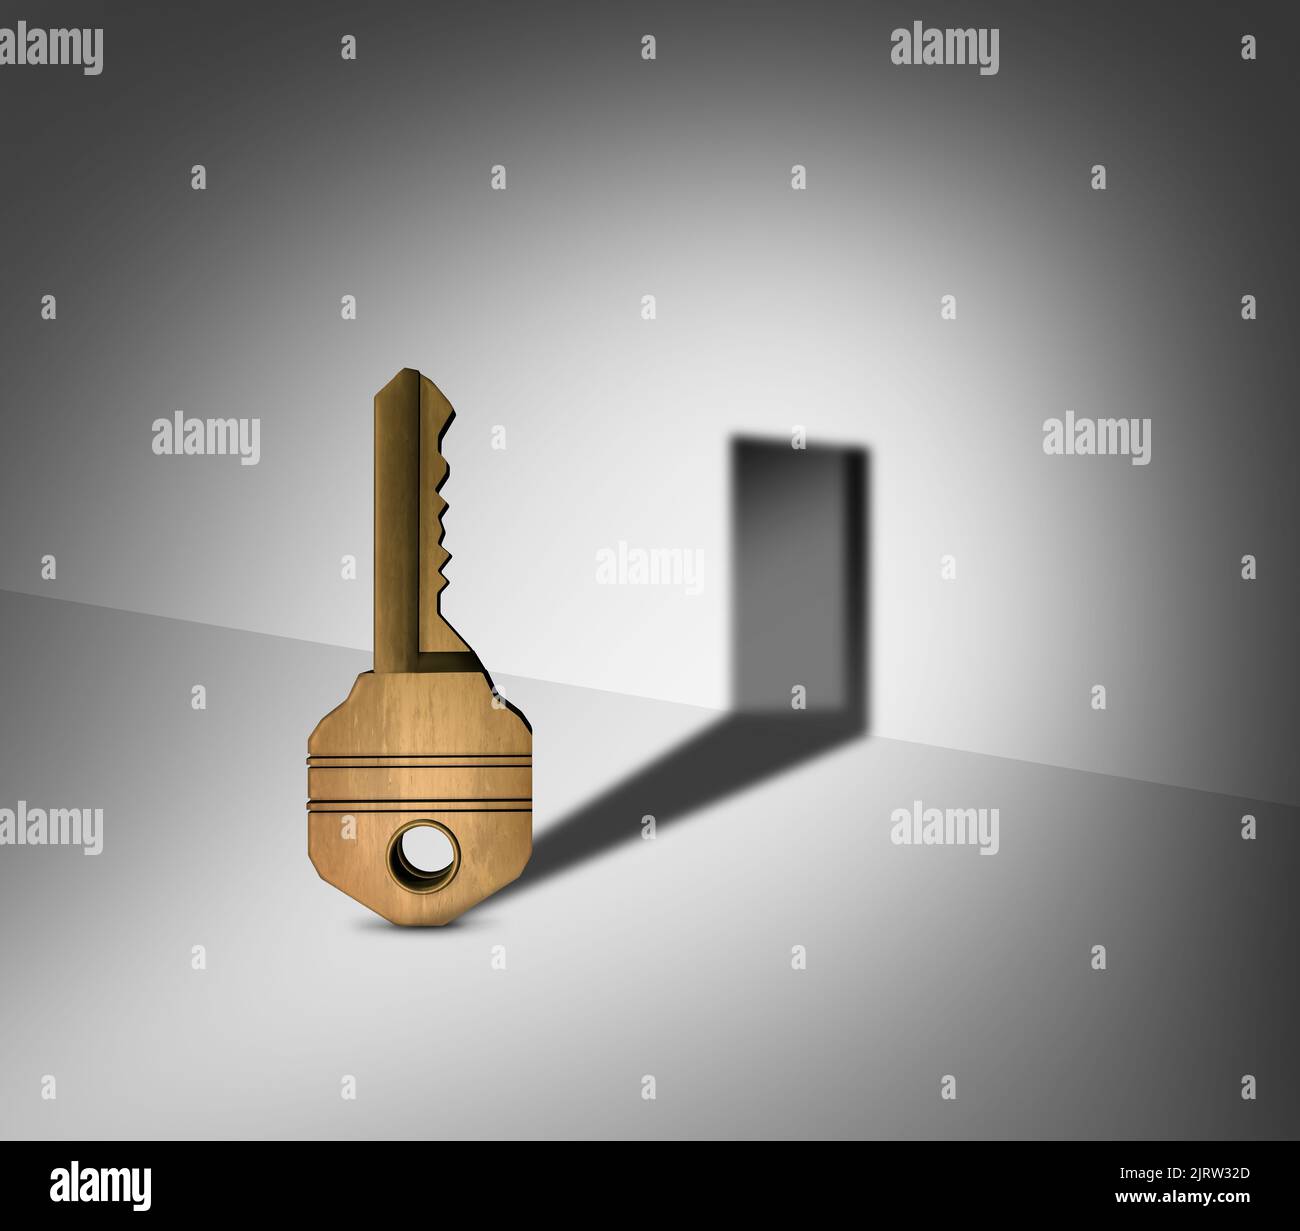 Key to opportunity and lock metaphor or business success symbol as a locking object casting a shadow of an open door as a 3D illustration. Stock Photo